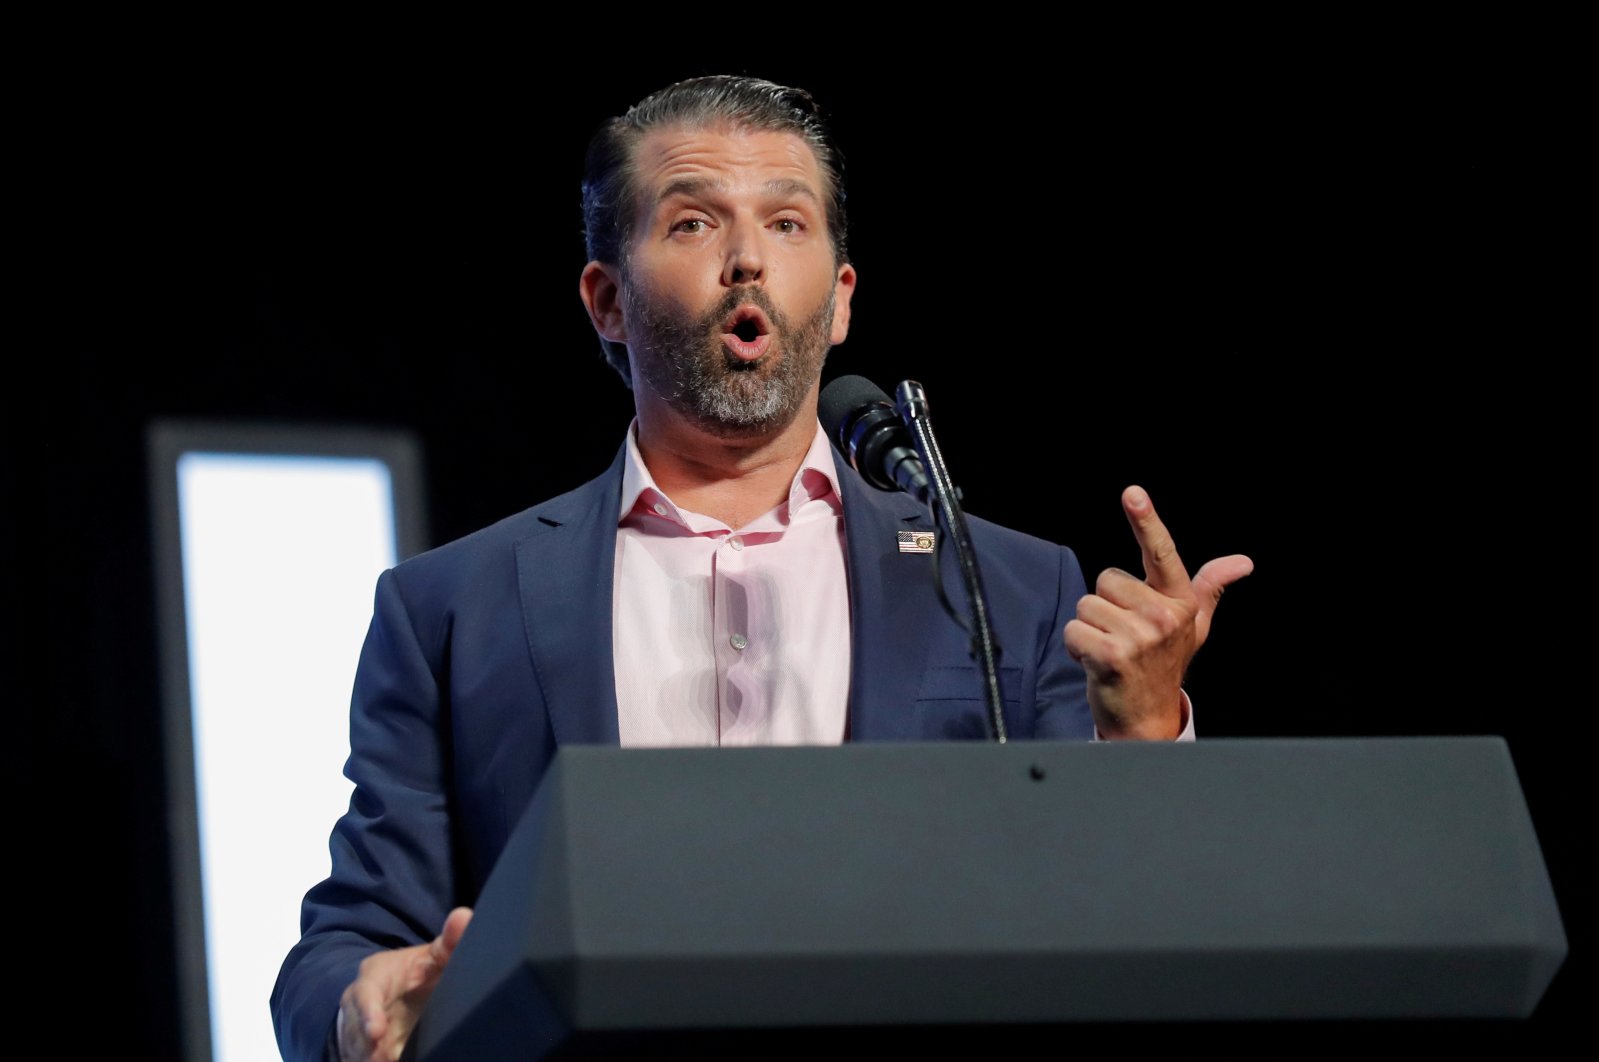 Donald Trump Jr. speaks to young people waiting to hear his father, U.S. President Donald Trump, at the Dream City Church in Phoenix, Arizona, U.S., June 23, 2020. (Reuters Photo)